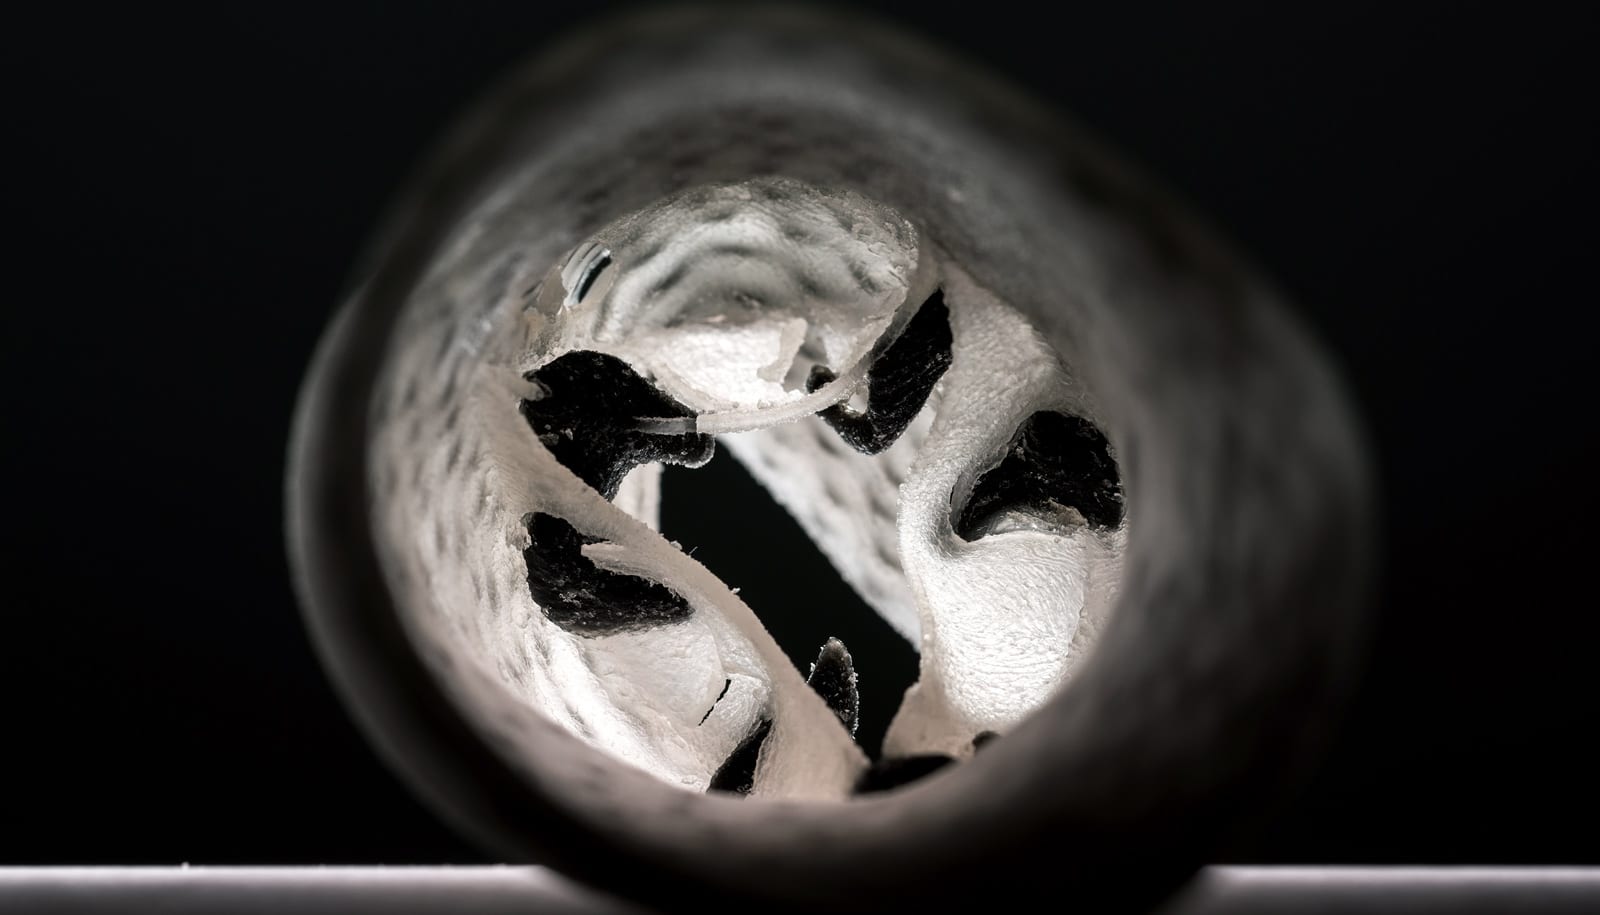 Inside the 3D-printed model of a human heart valve, black regions represent the location of actual calcium deposits.